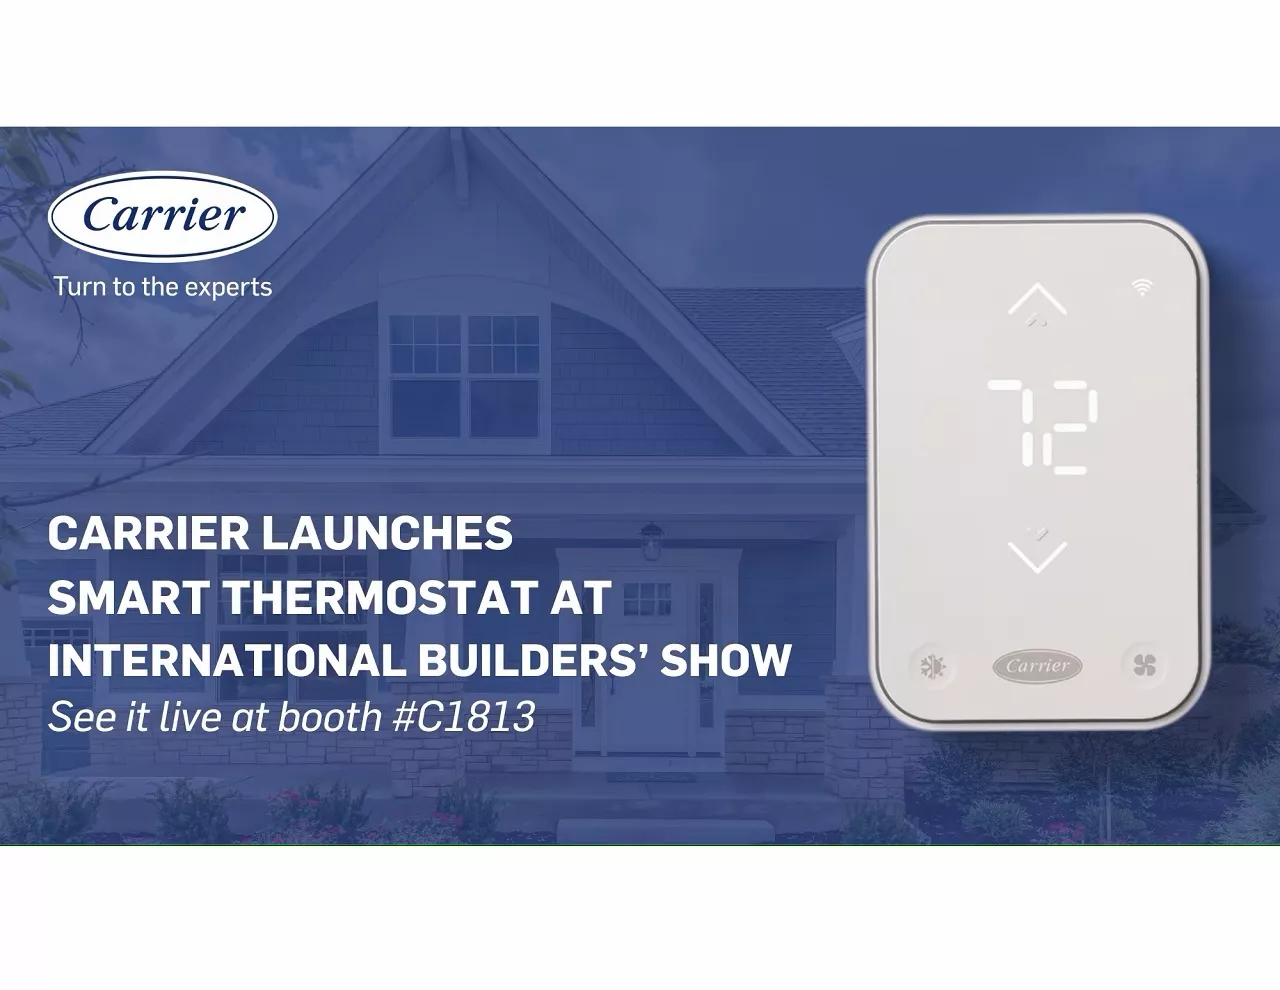 Carrier Launches Smart Thermostat